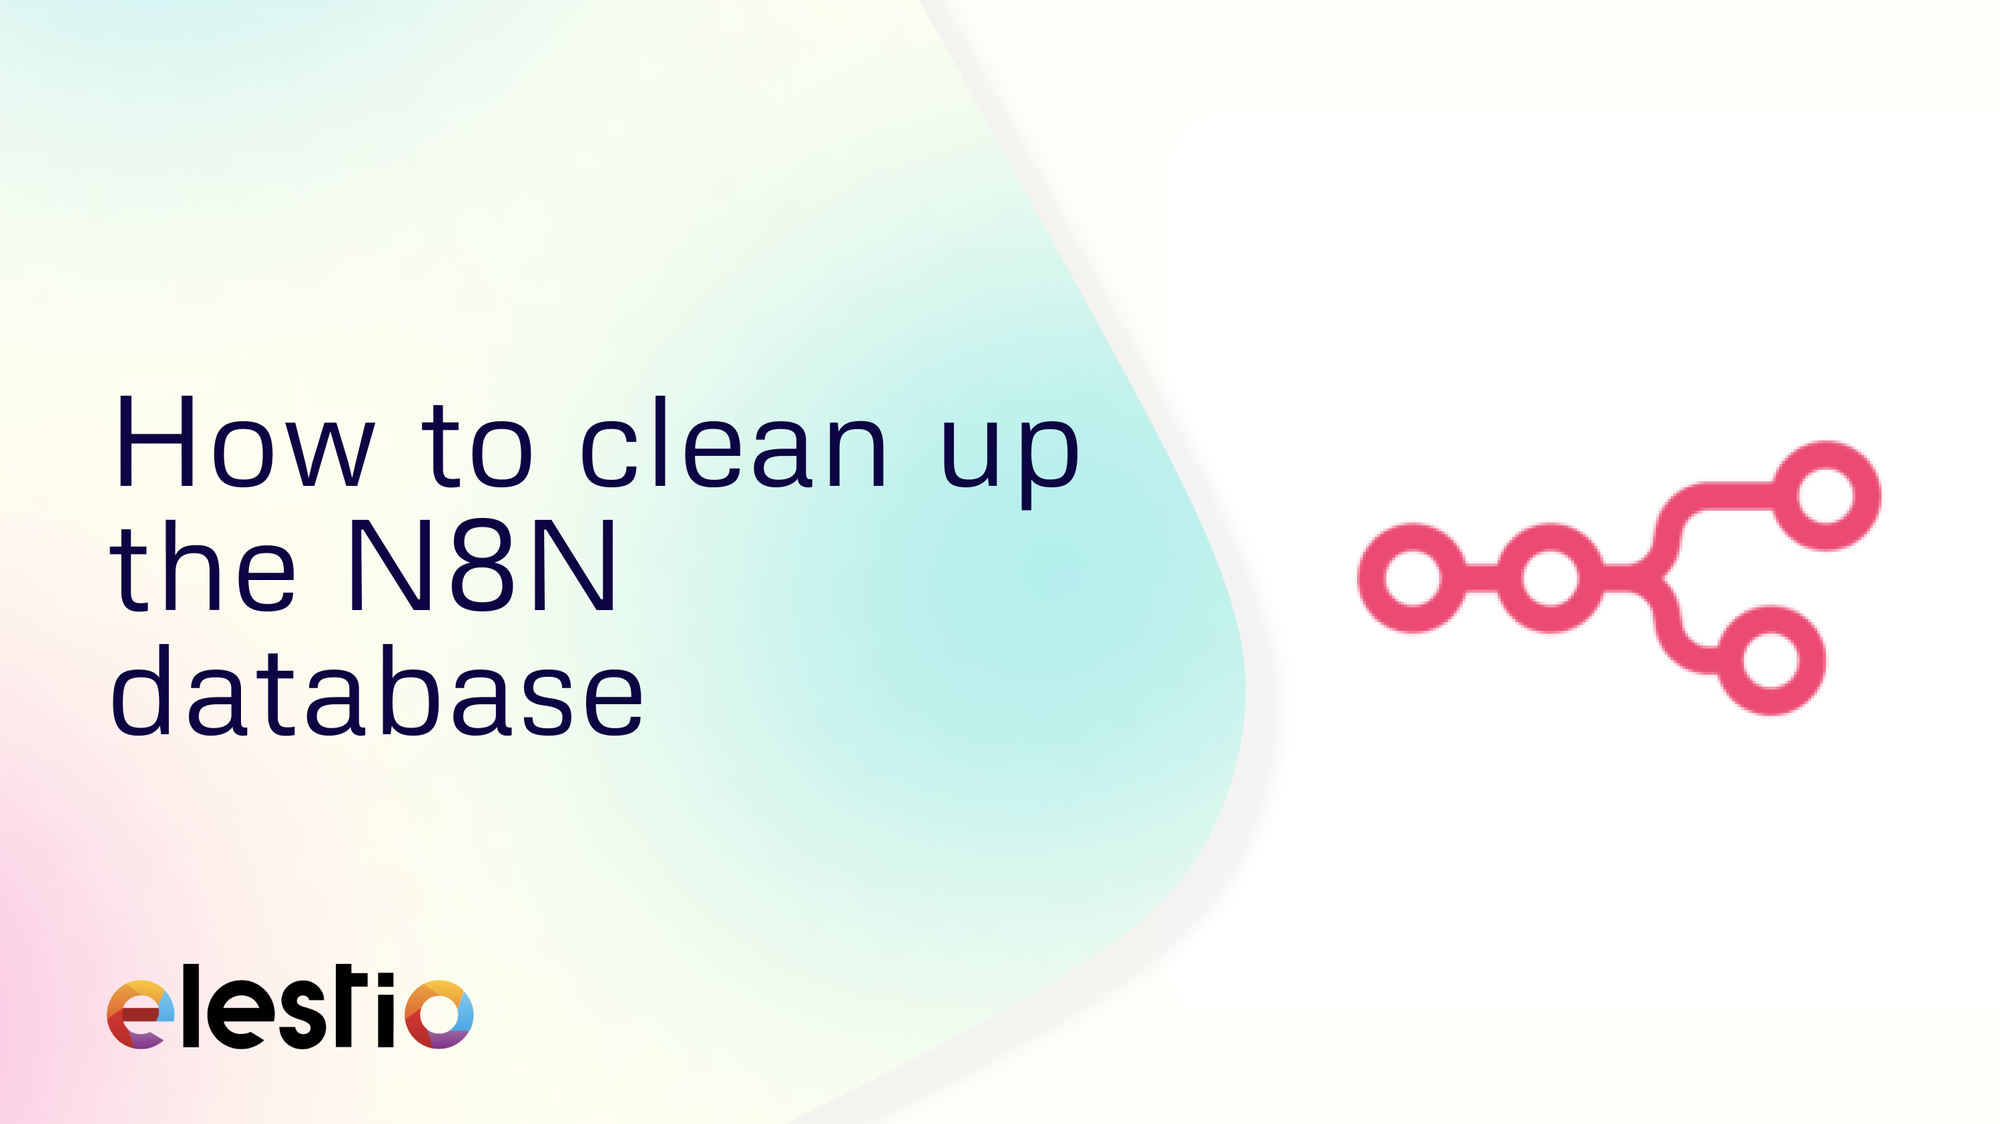 How to clean up the N8N database